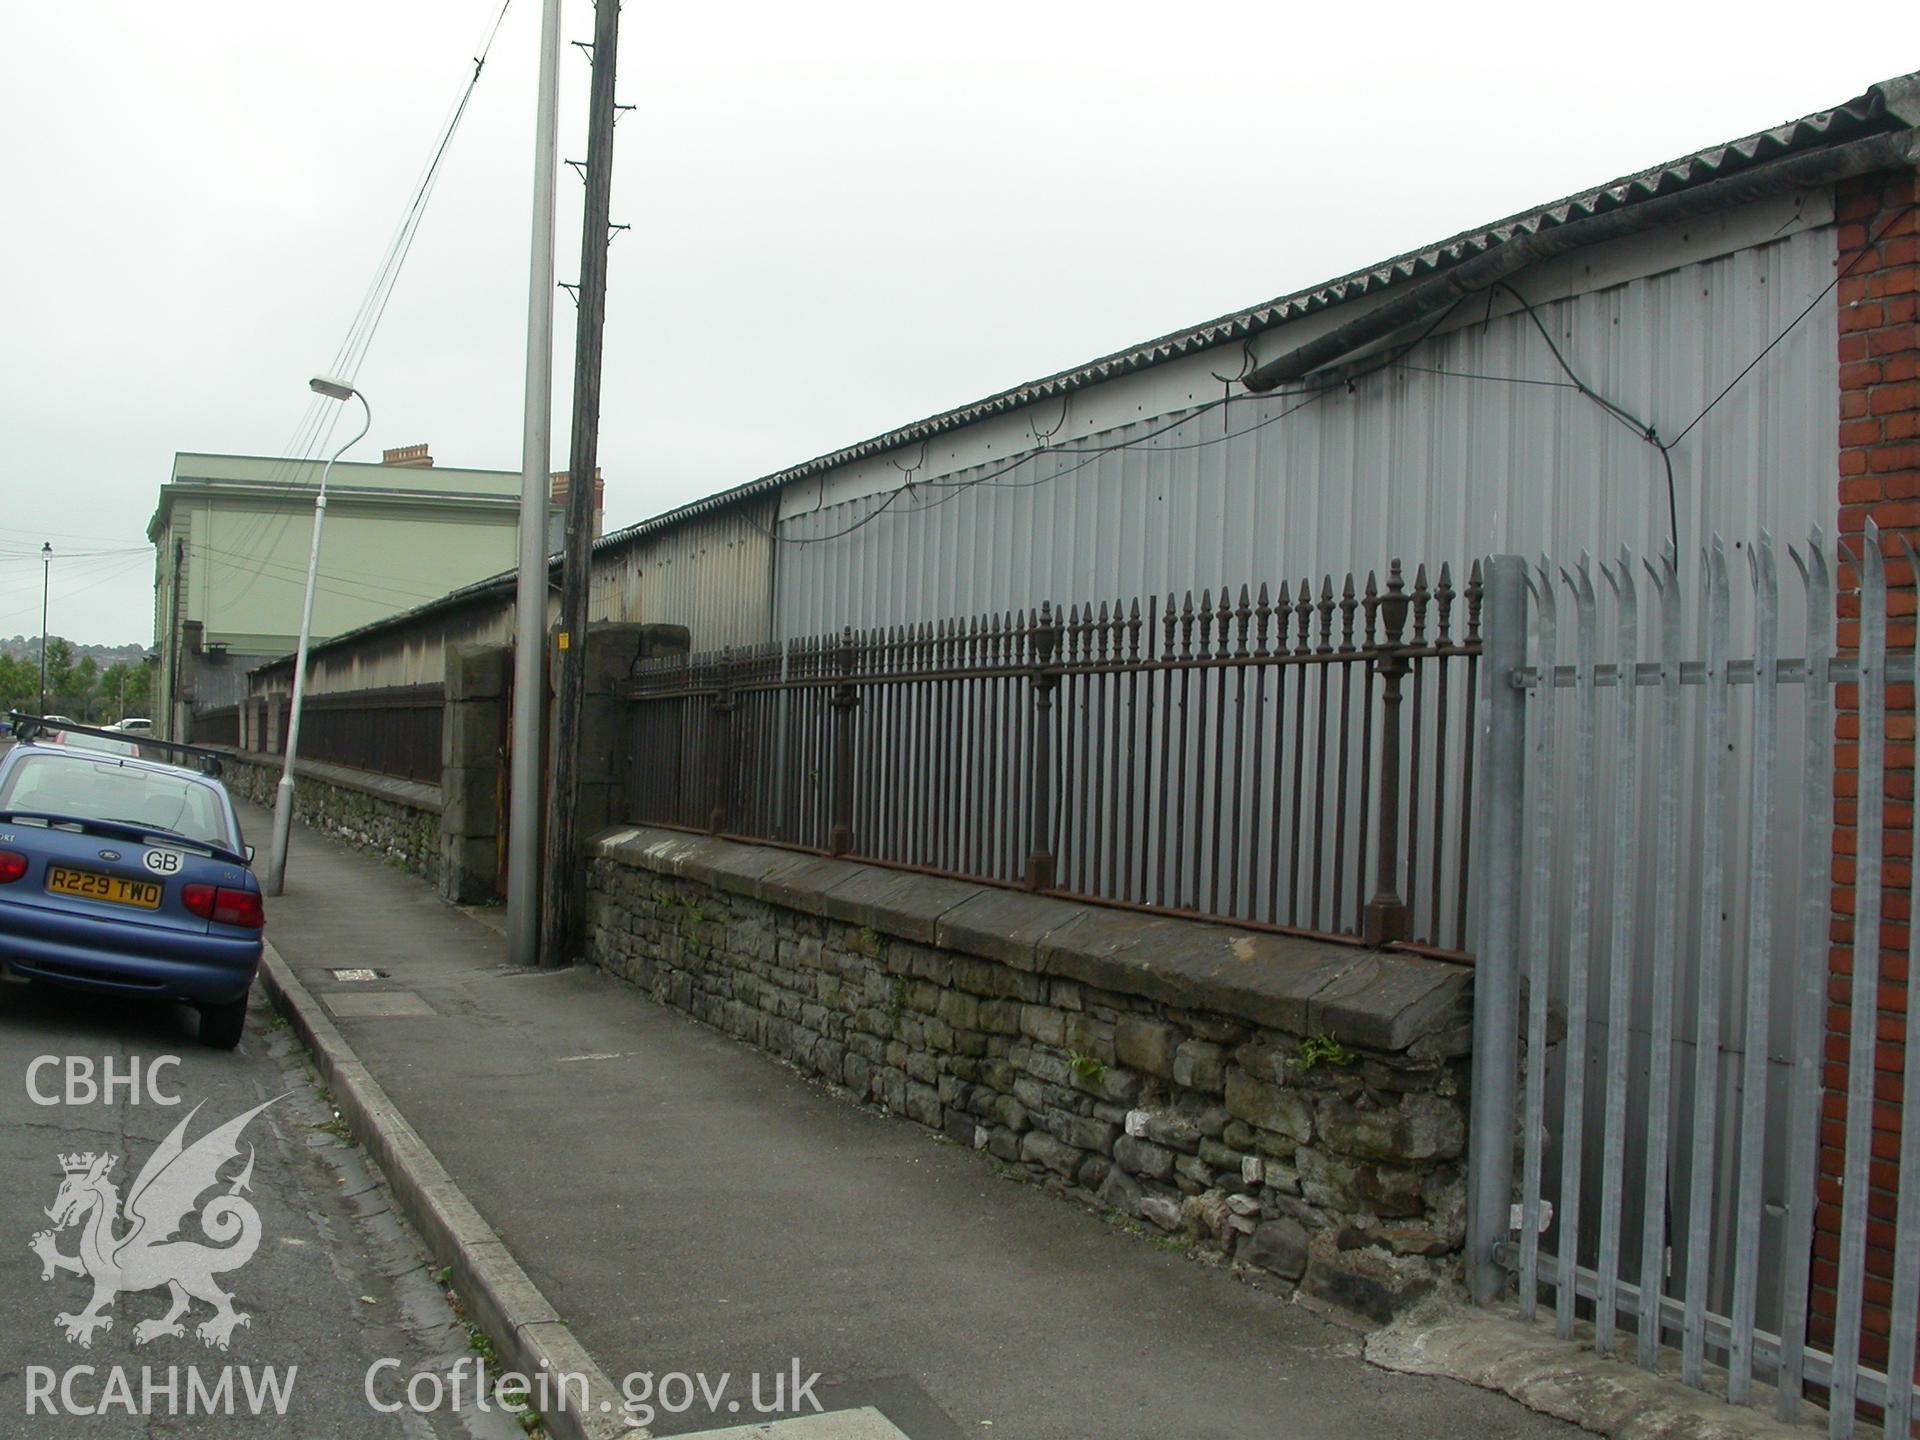 Former central Ruperra Street gate covered in later corrugated-iron.